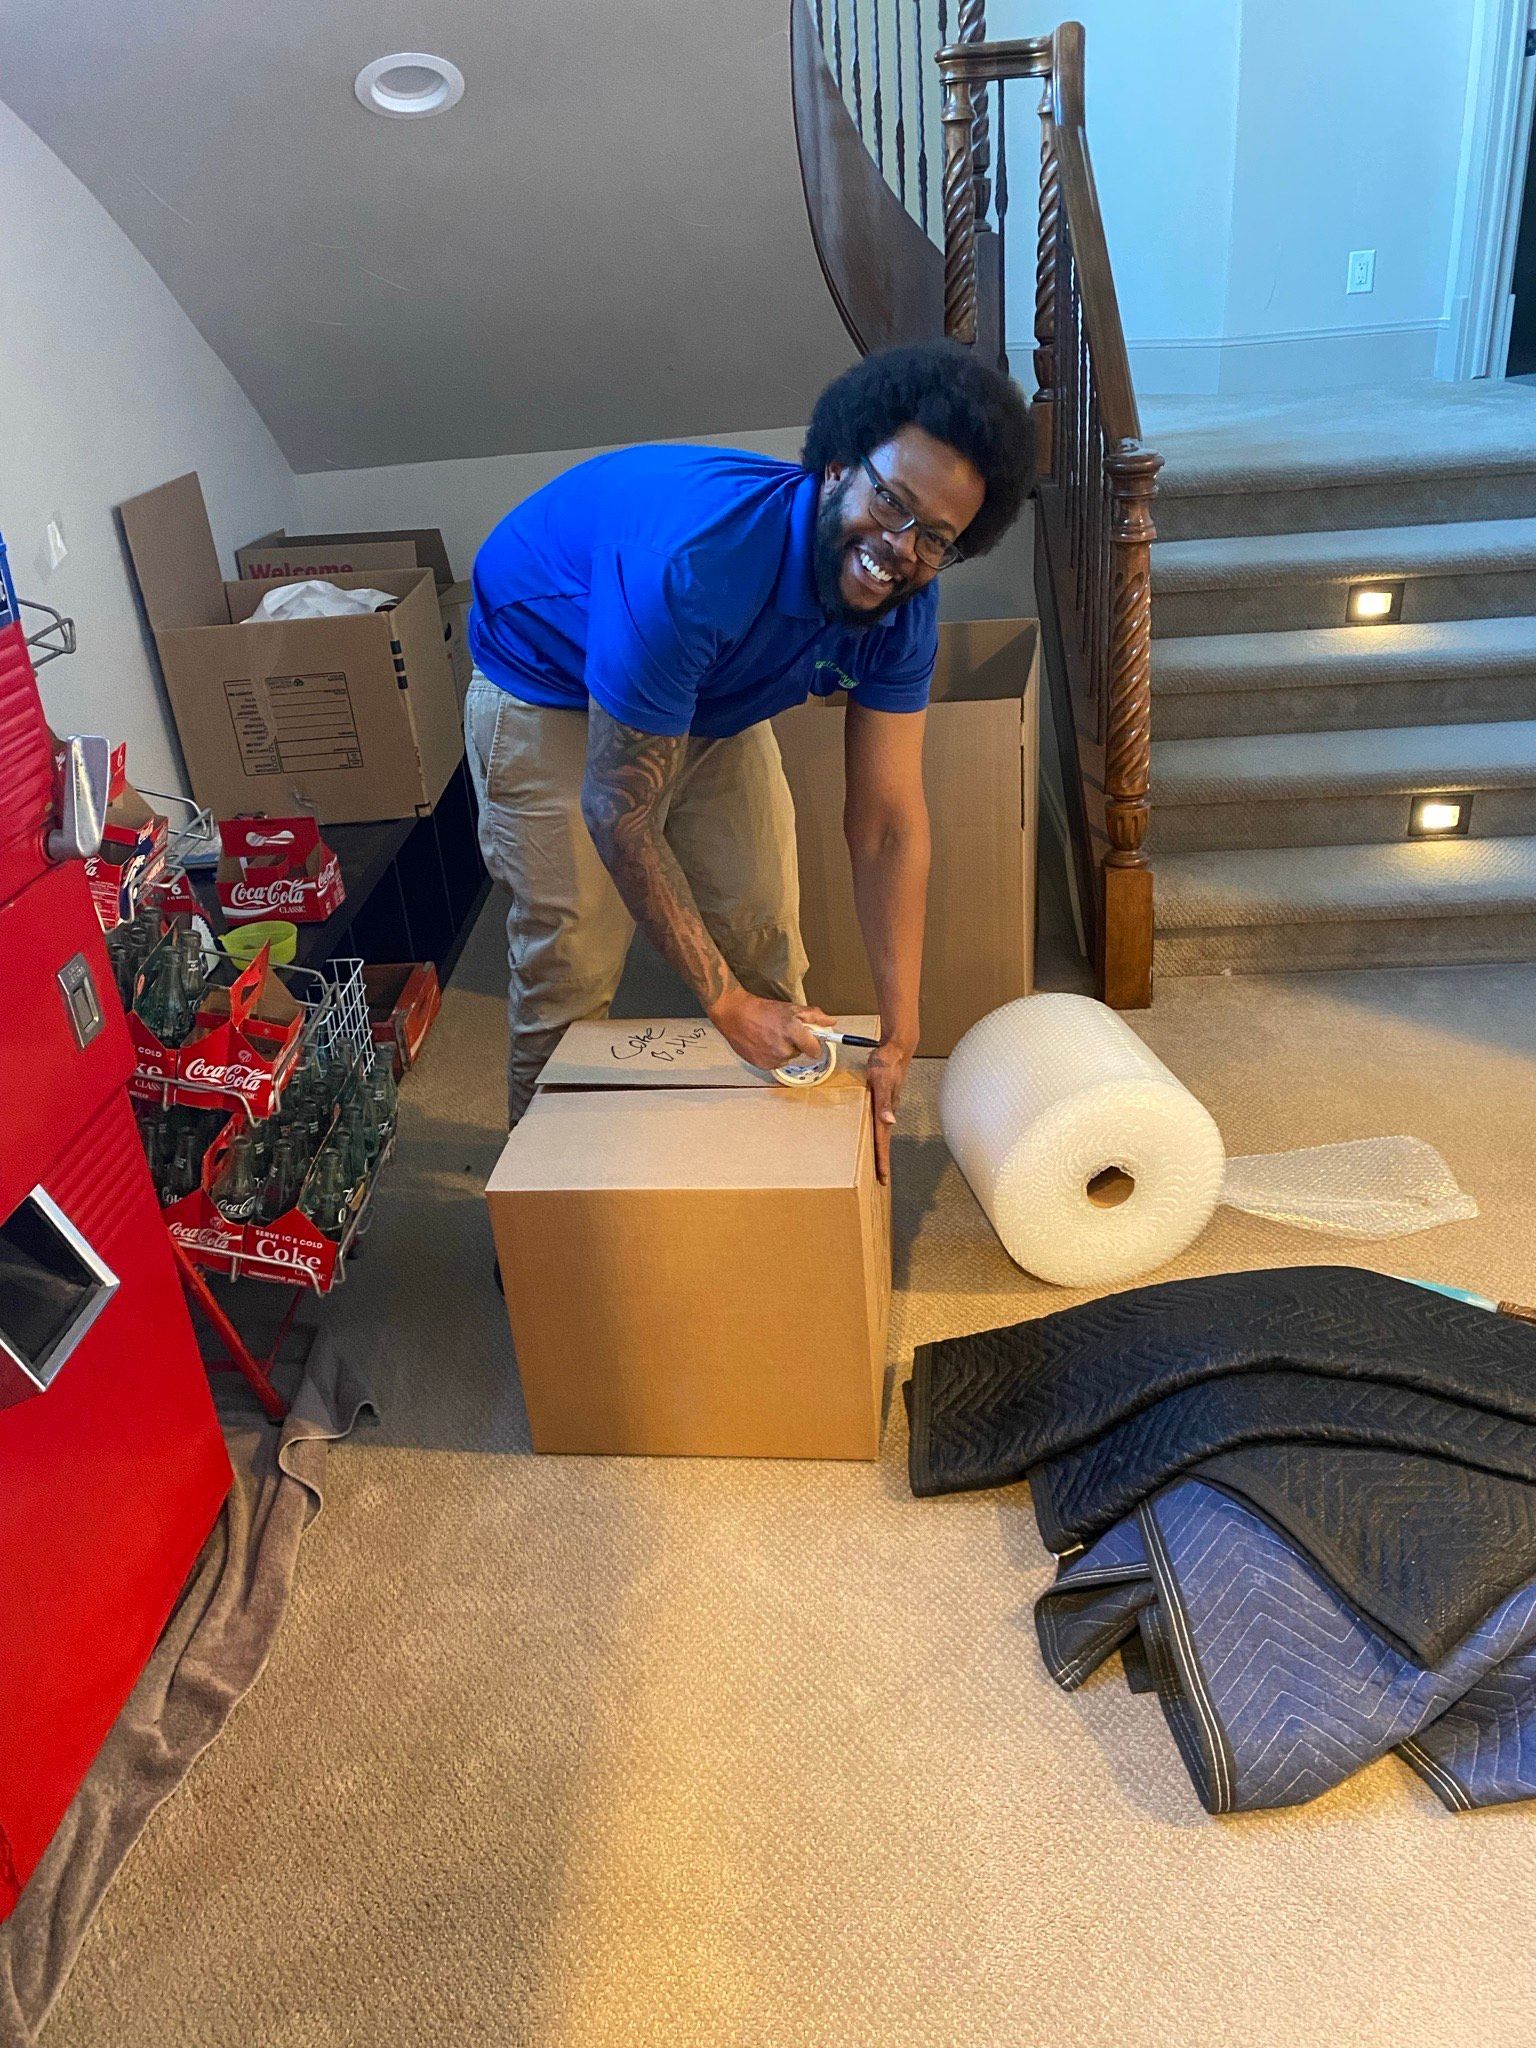 a man is packing a box in a living room .